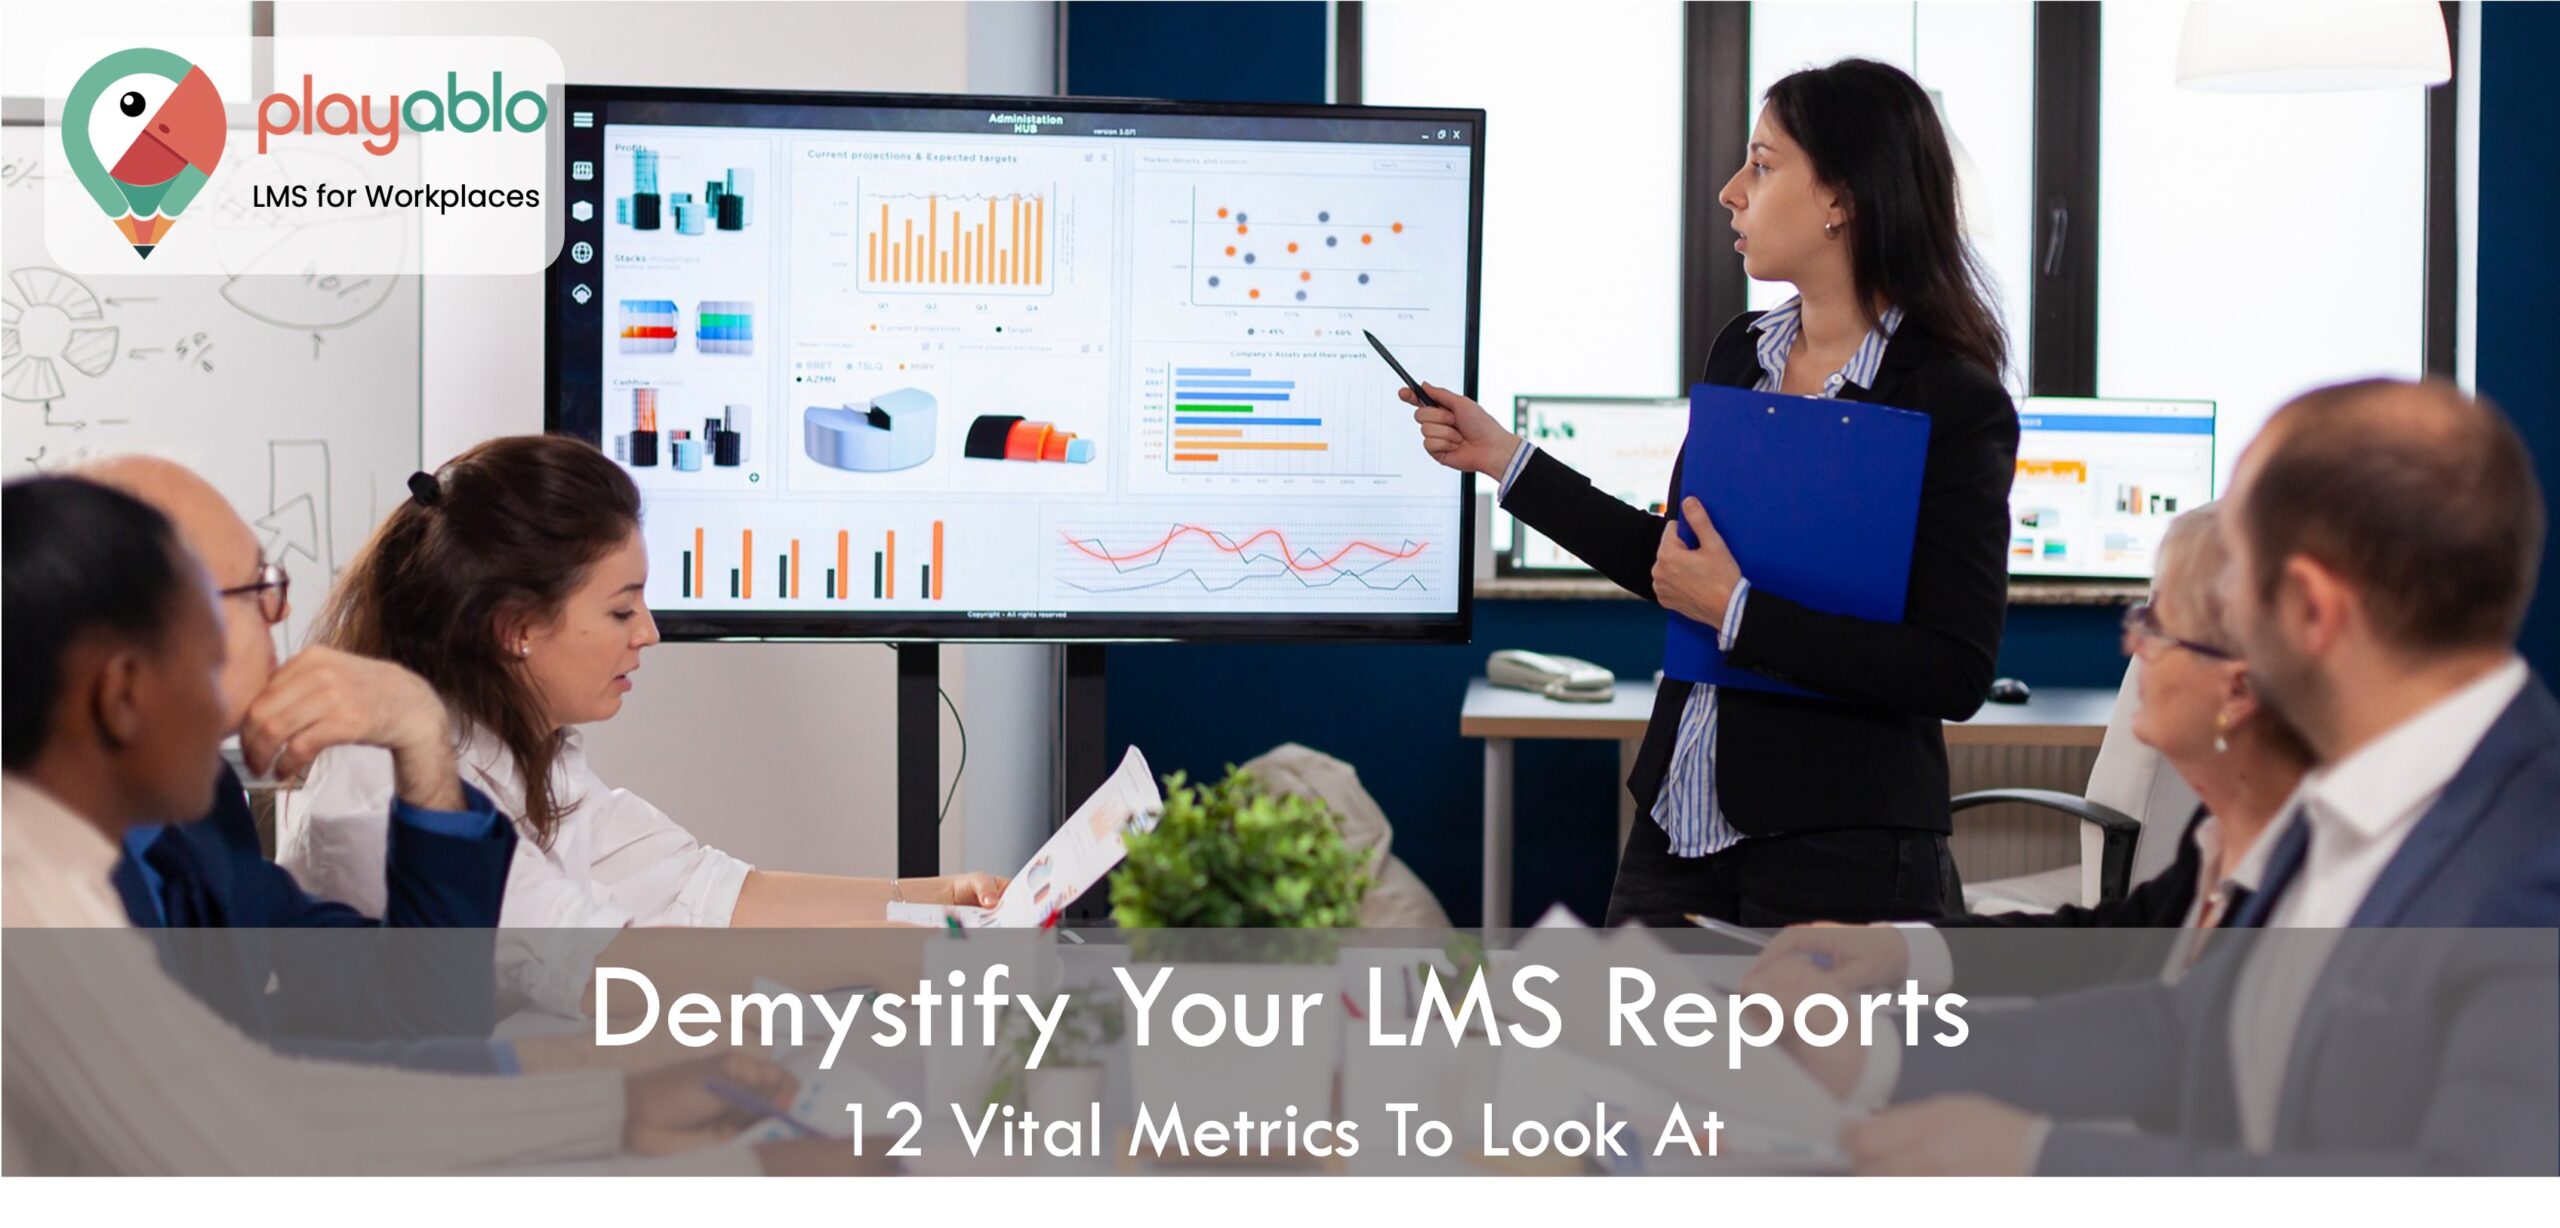 LMS reports